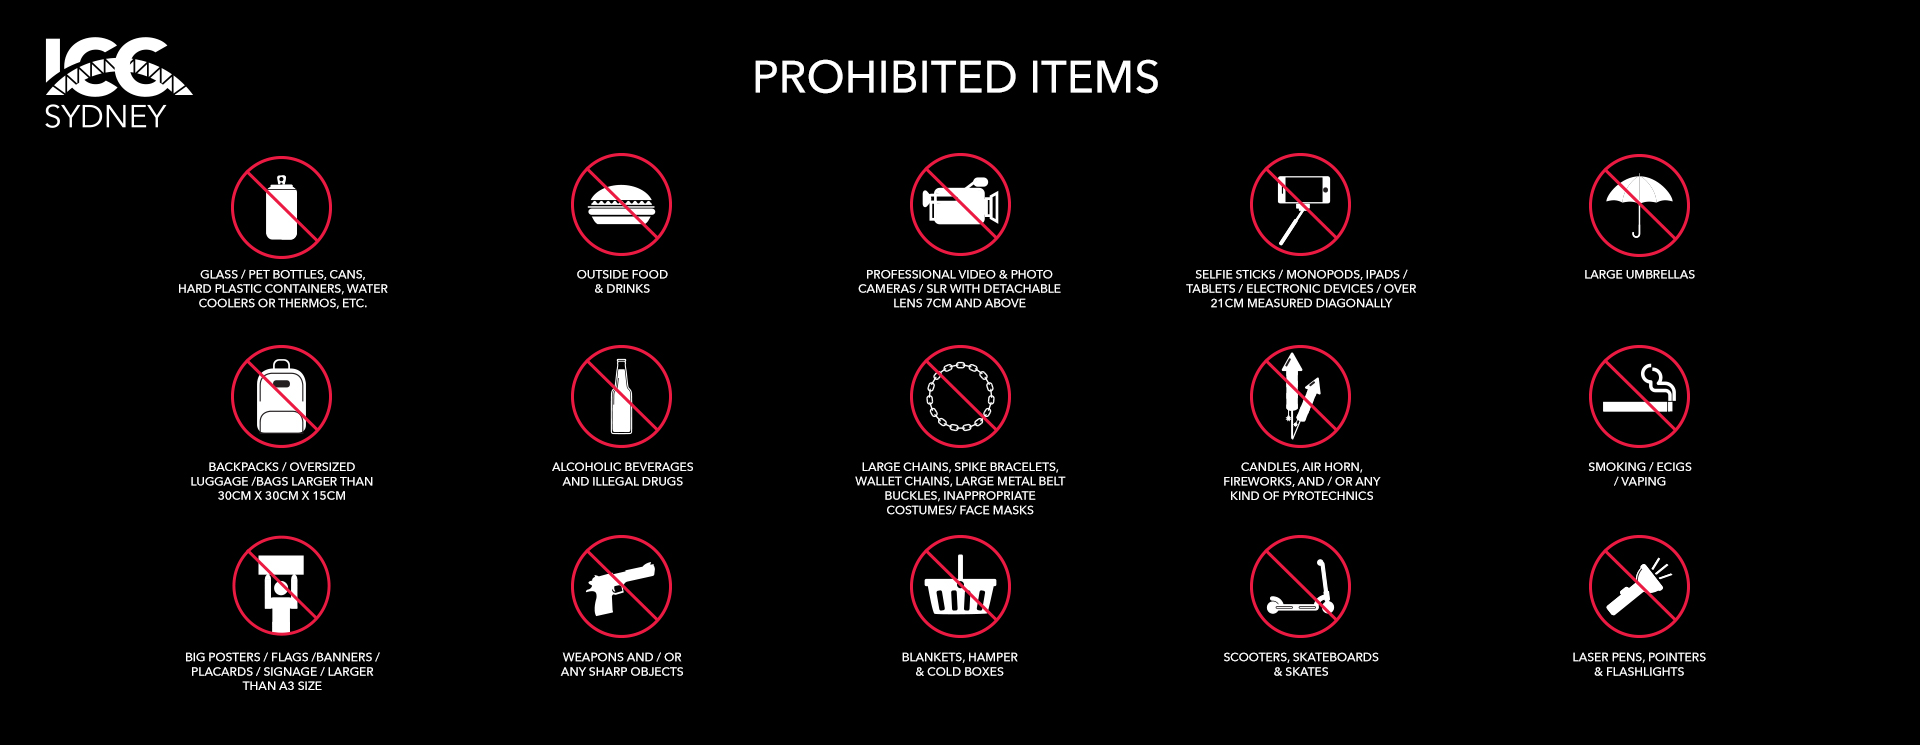 Conditions of Entry - Prohibited items.